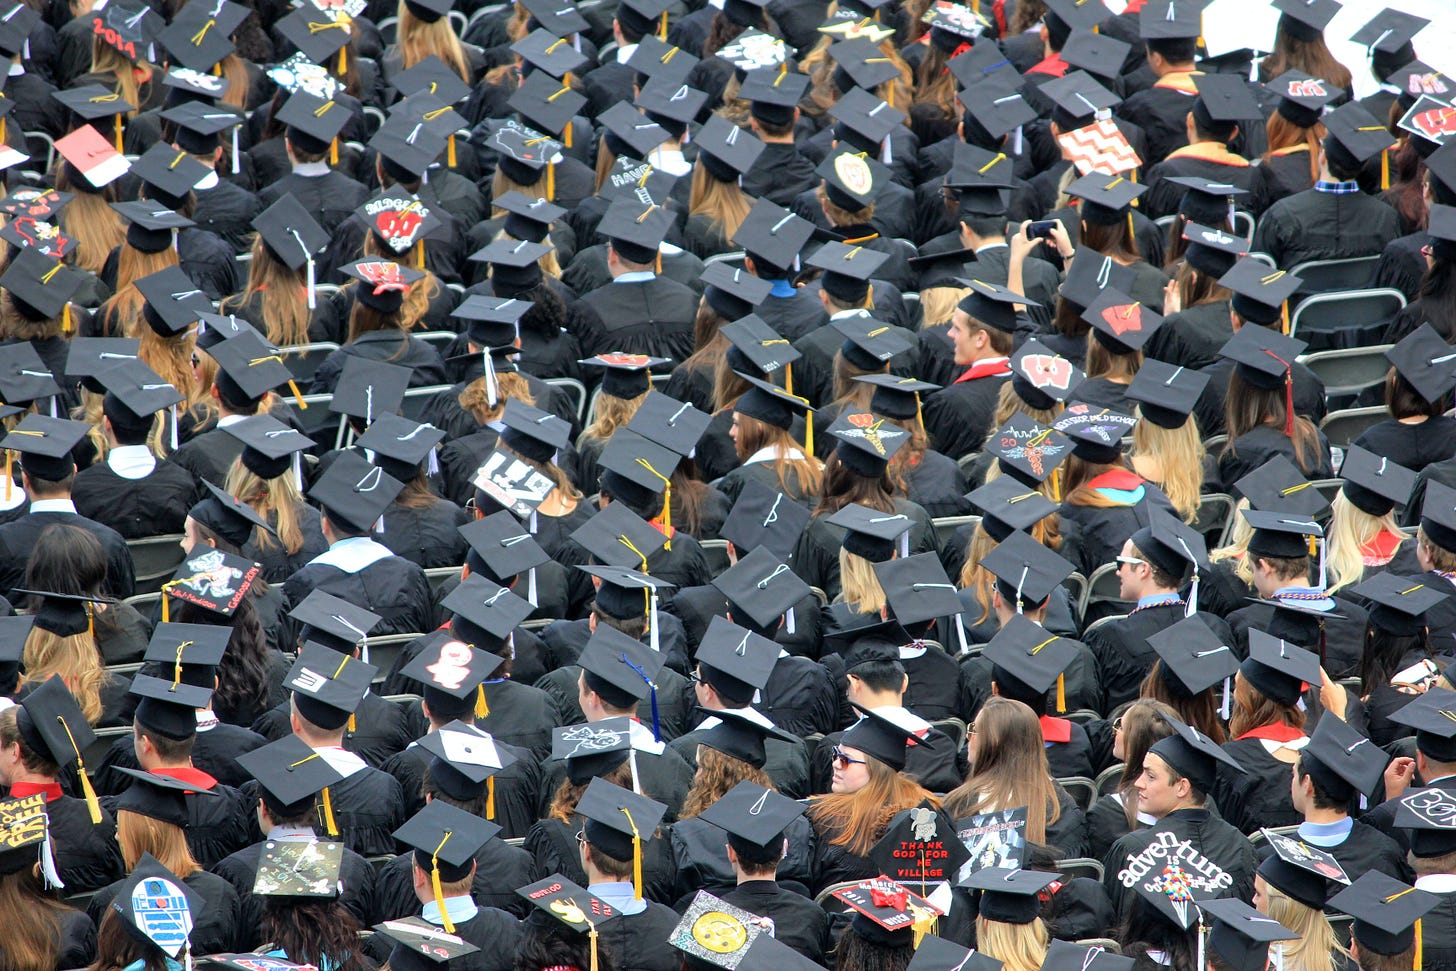 A crowd of graduates in cap and gown. The caps are black. 